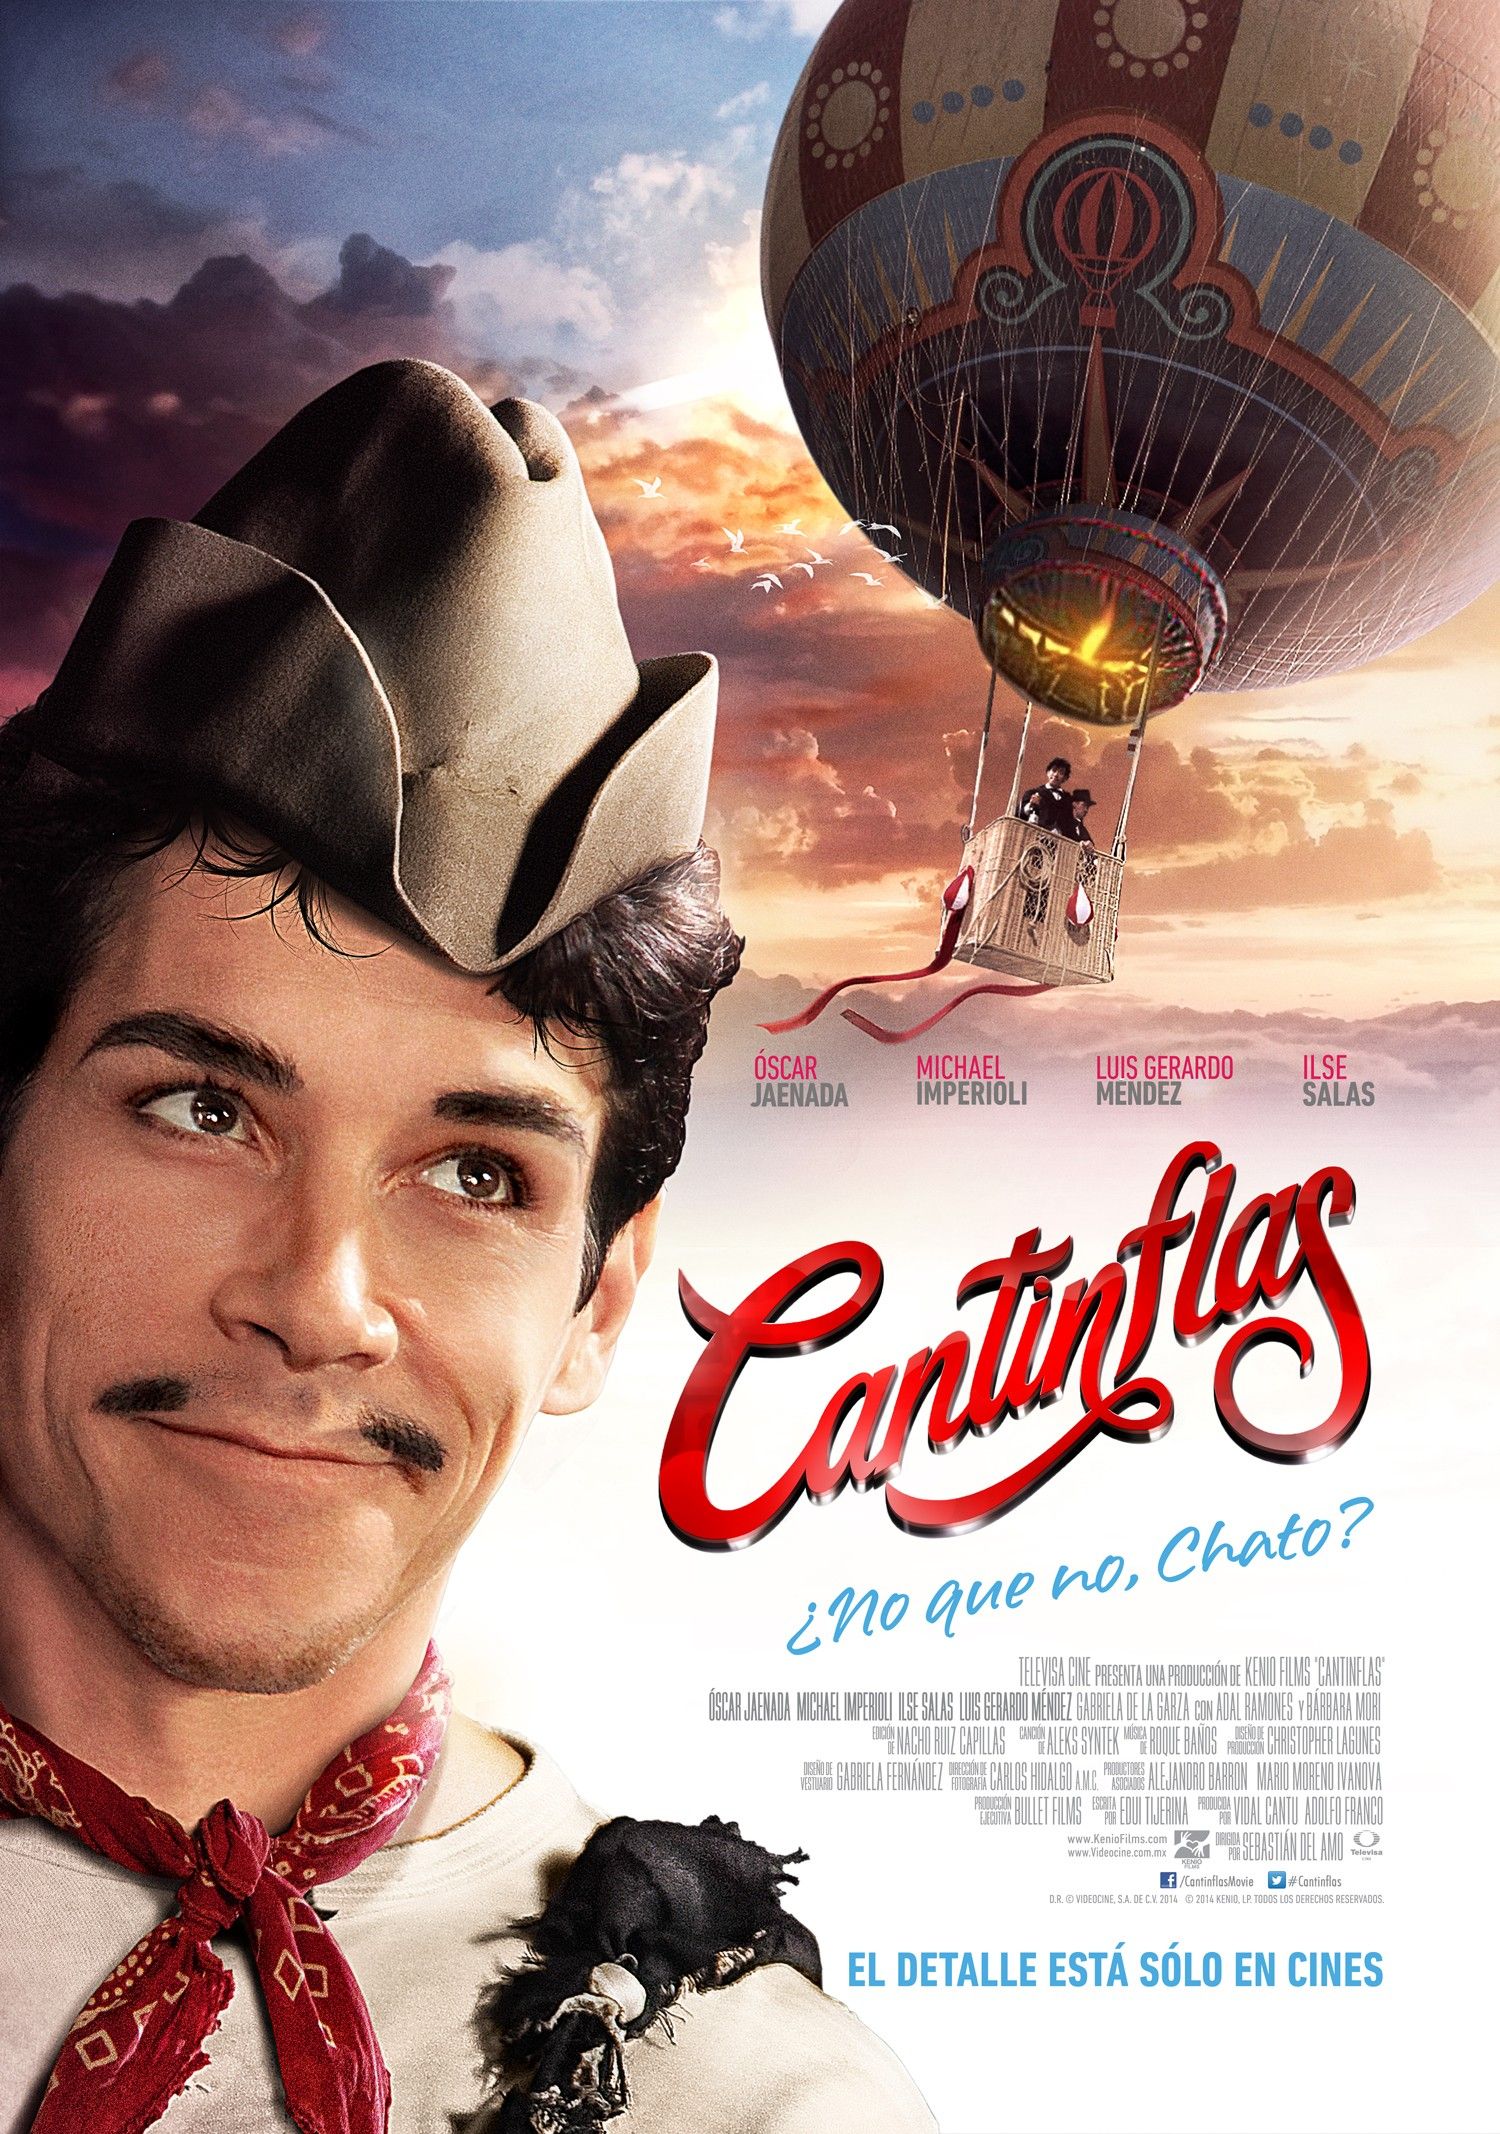 Cantinflas Poster 3: Full Size Poster Image